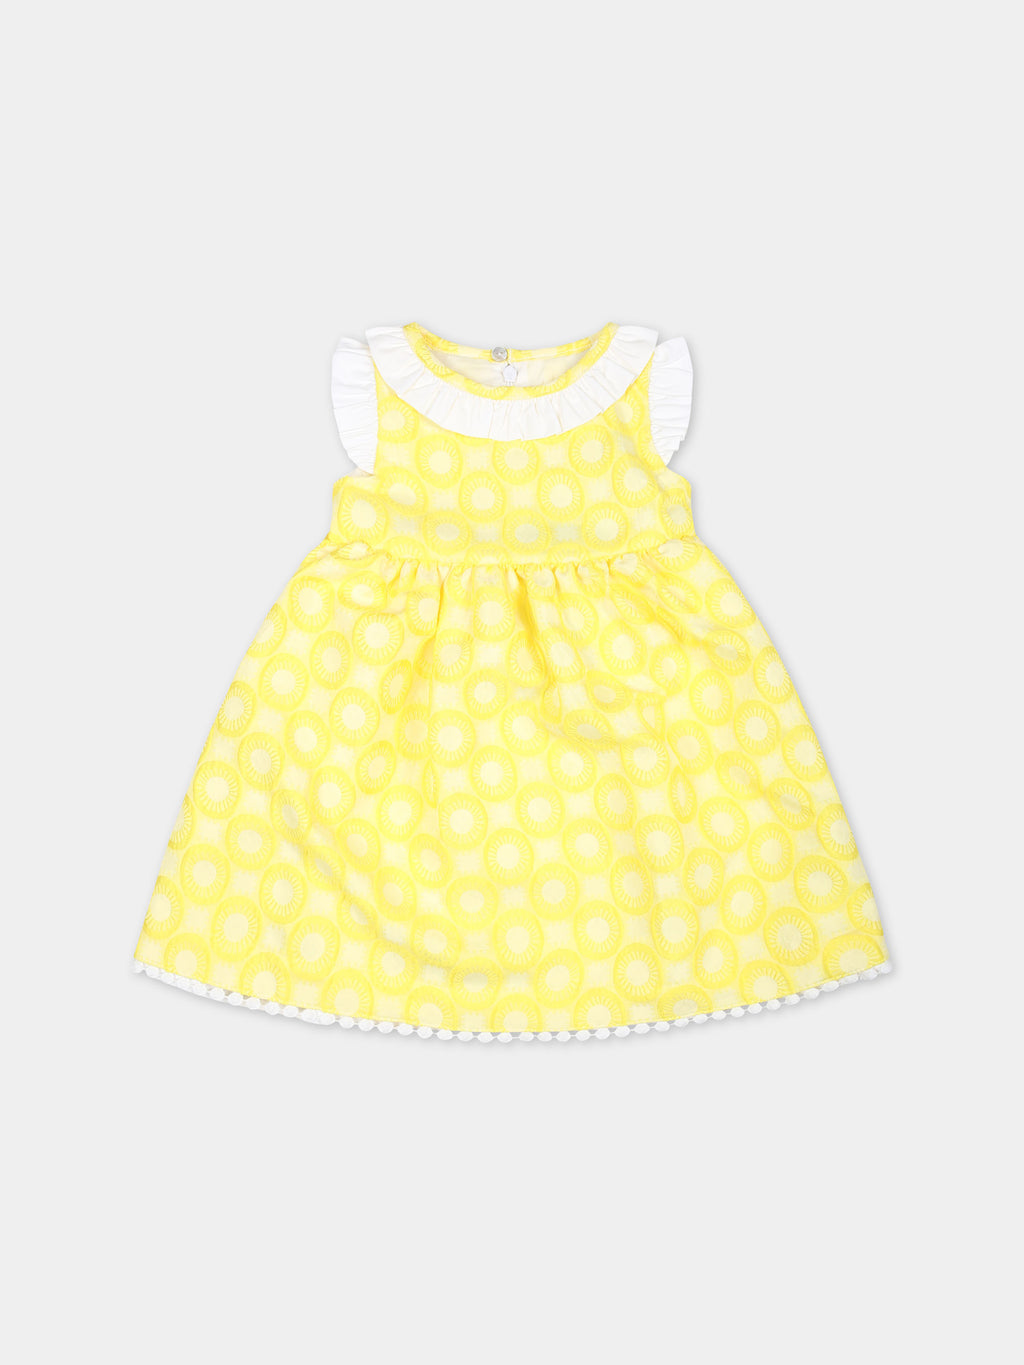 Yellow dress for baby girl with embroidery